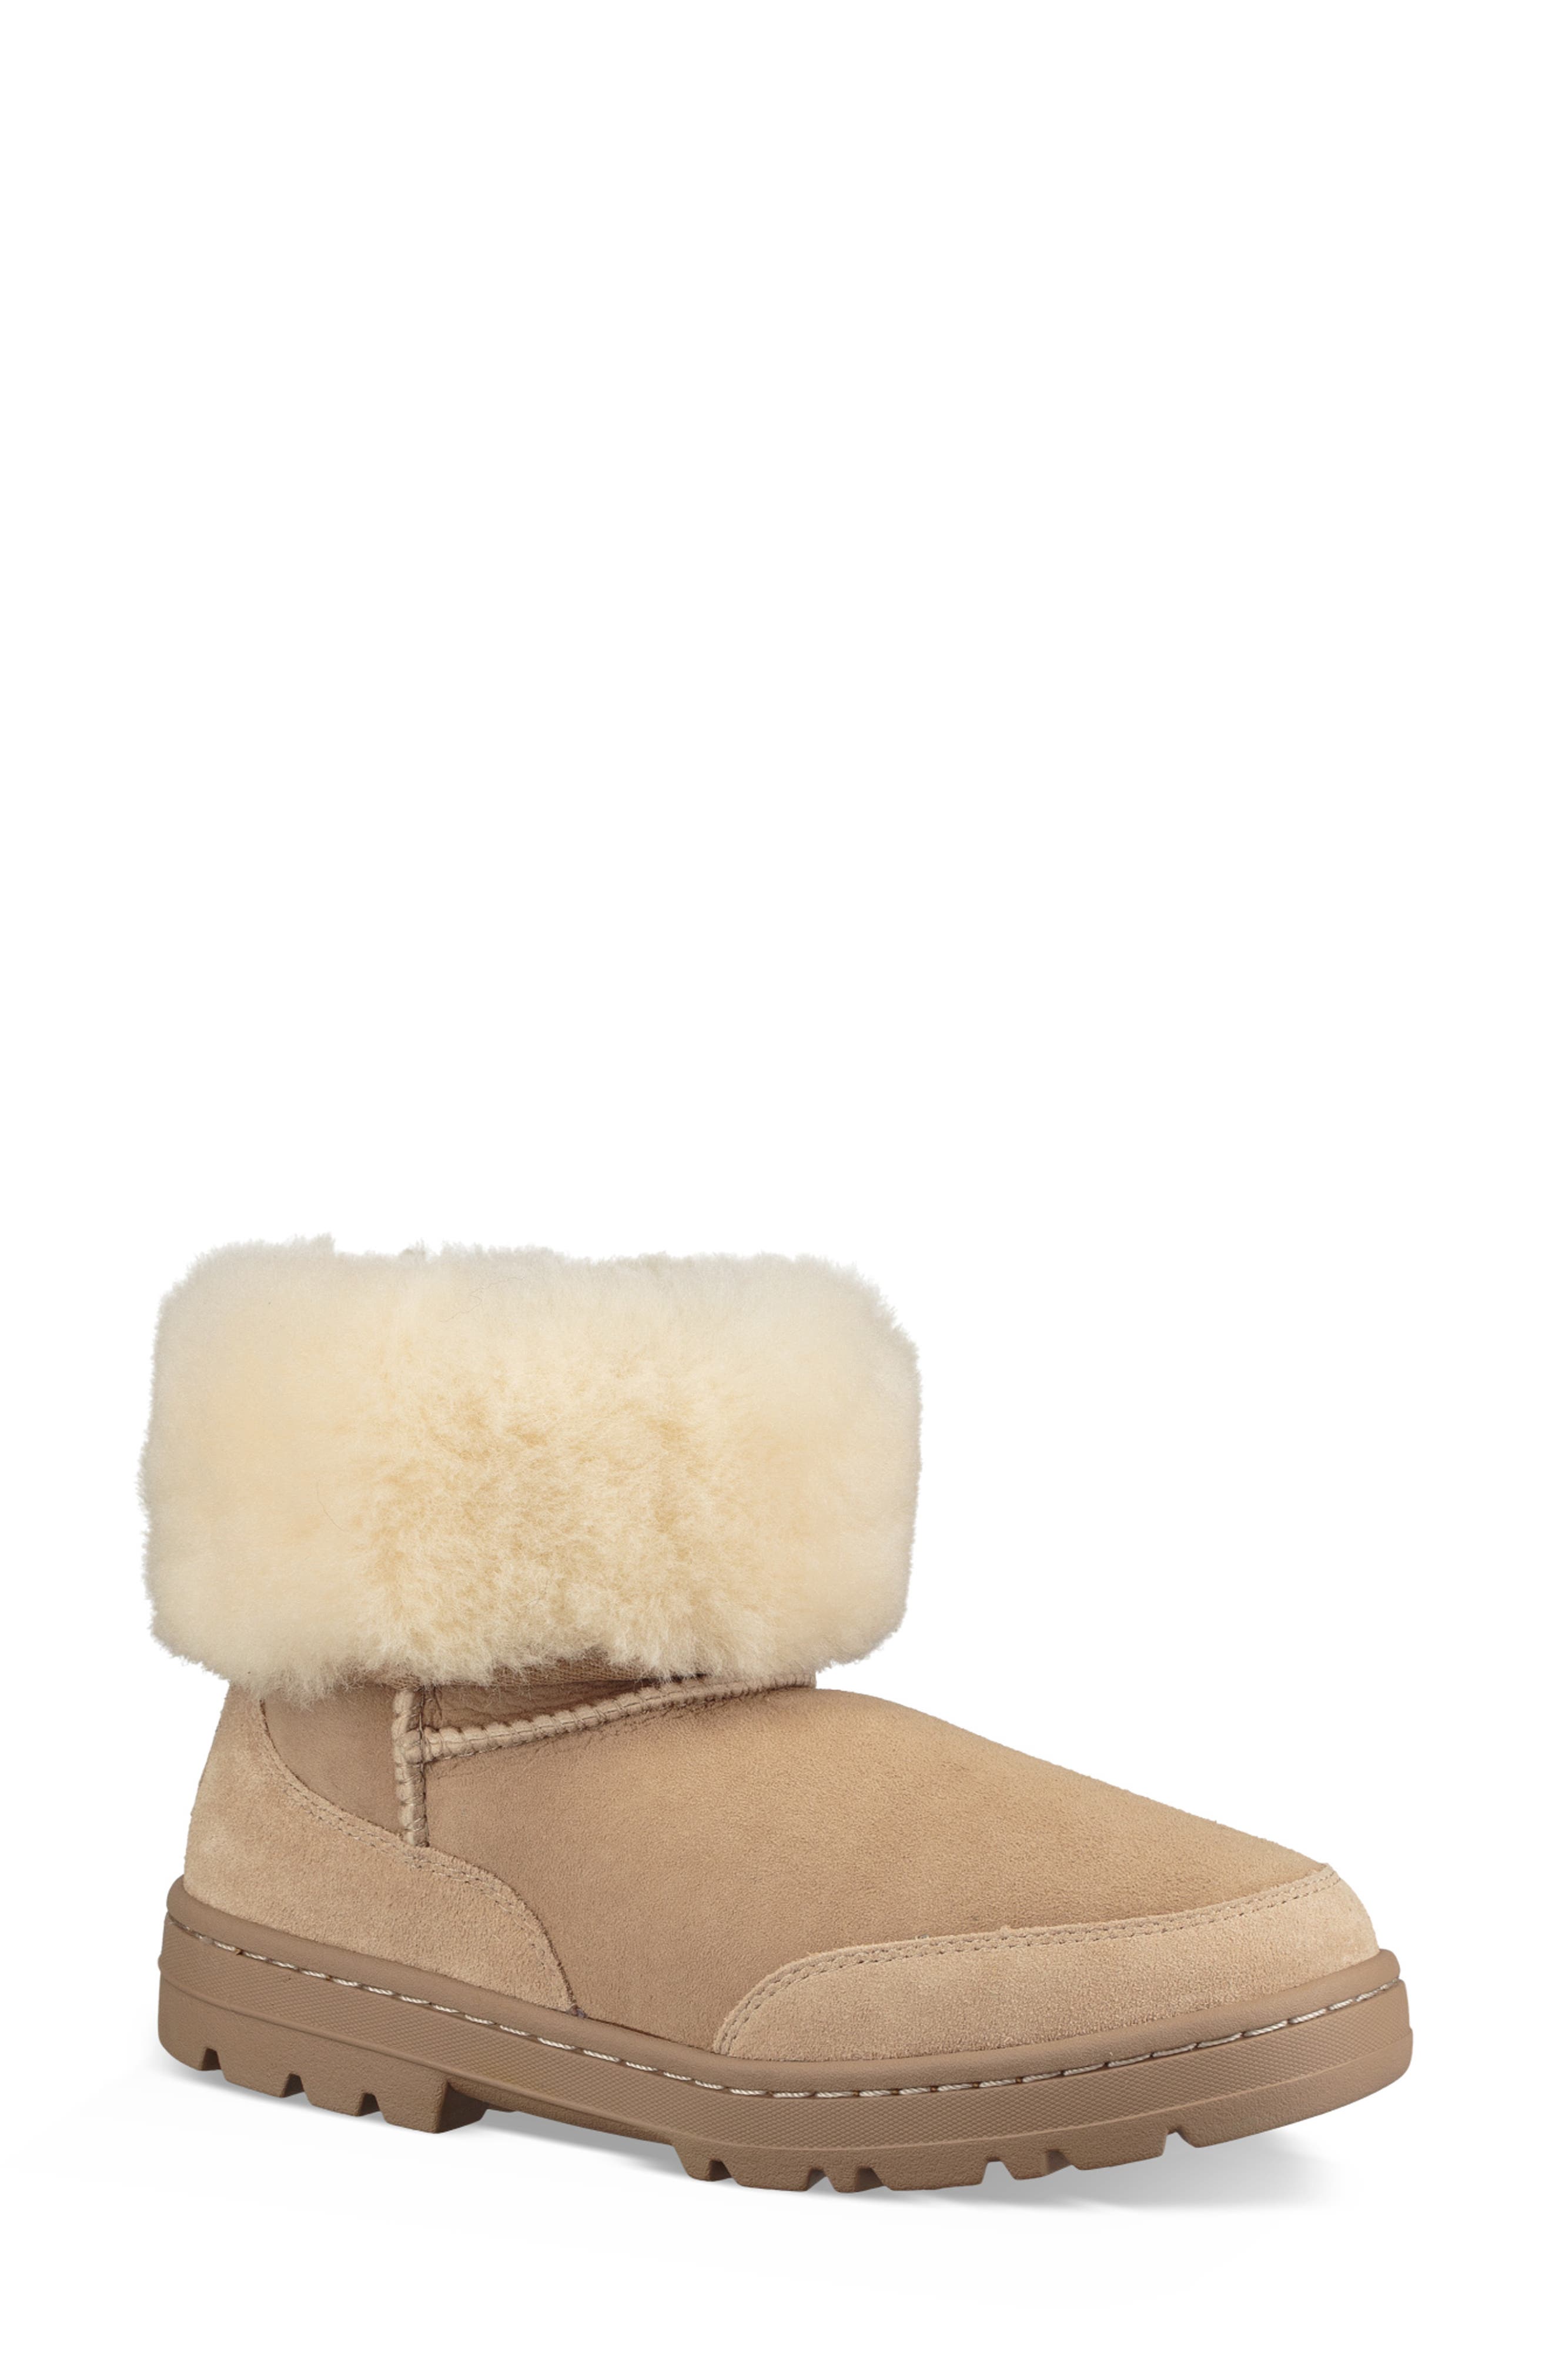 ultra revival ugg boots